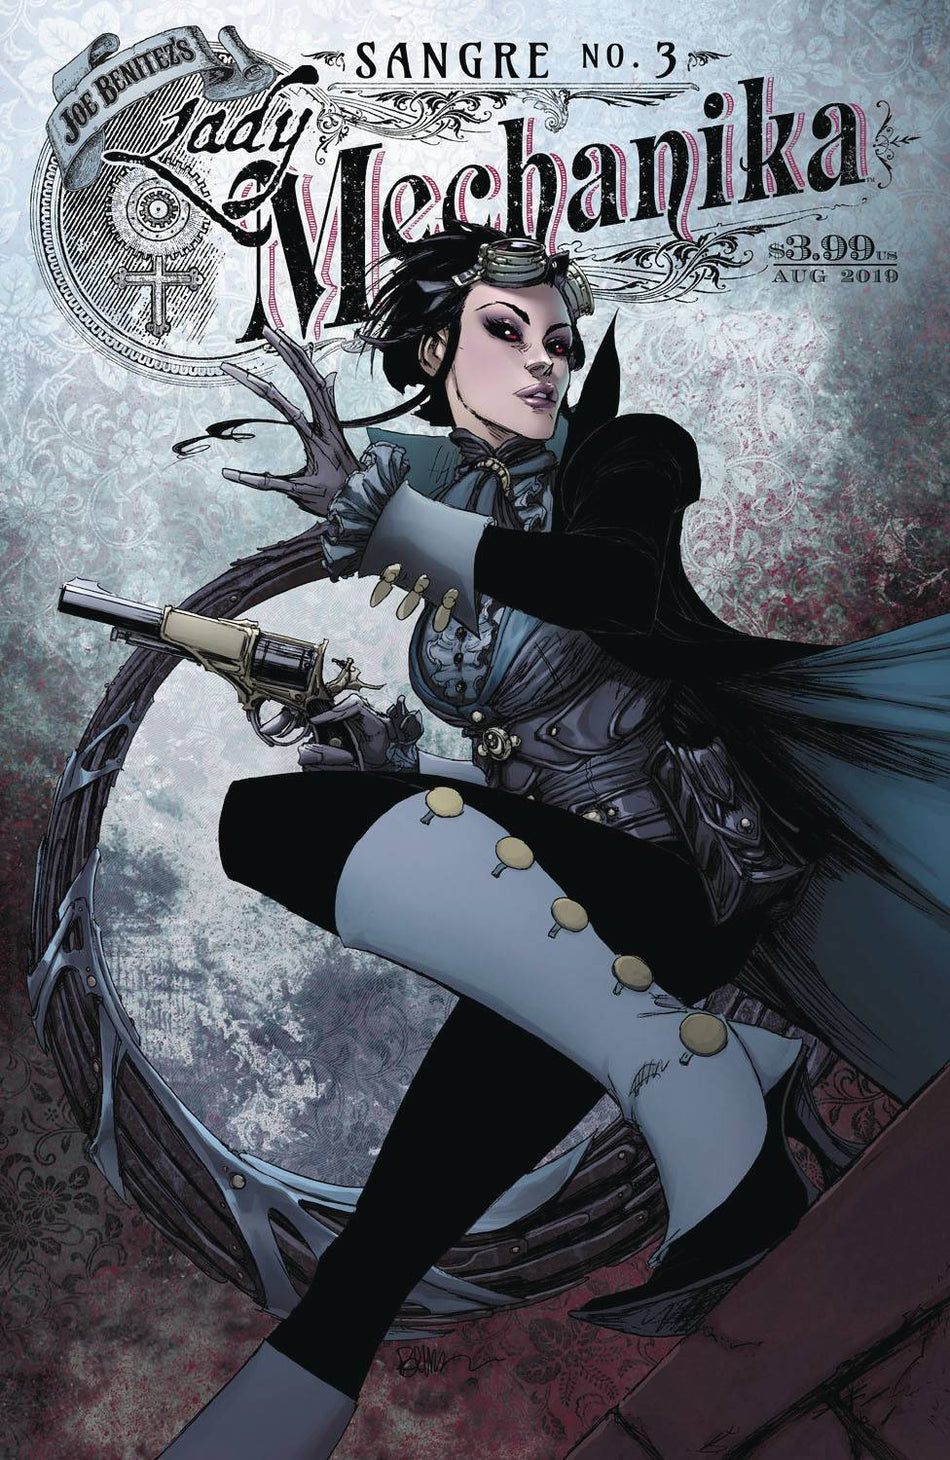 Photo of Lady Mechanika Sangre Issue 3 (of 5) Main & Mix Var Cvrs comic sold by Stronghold Collectibles